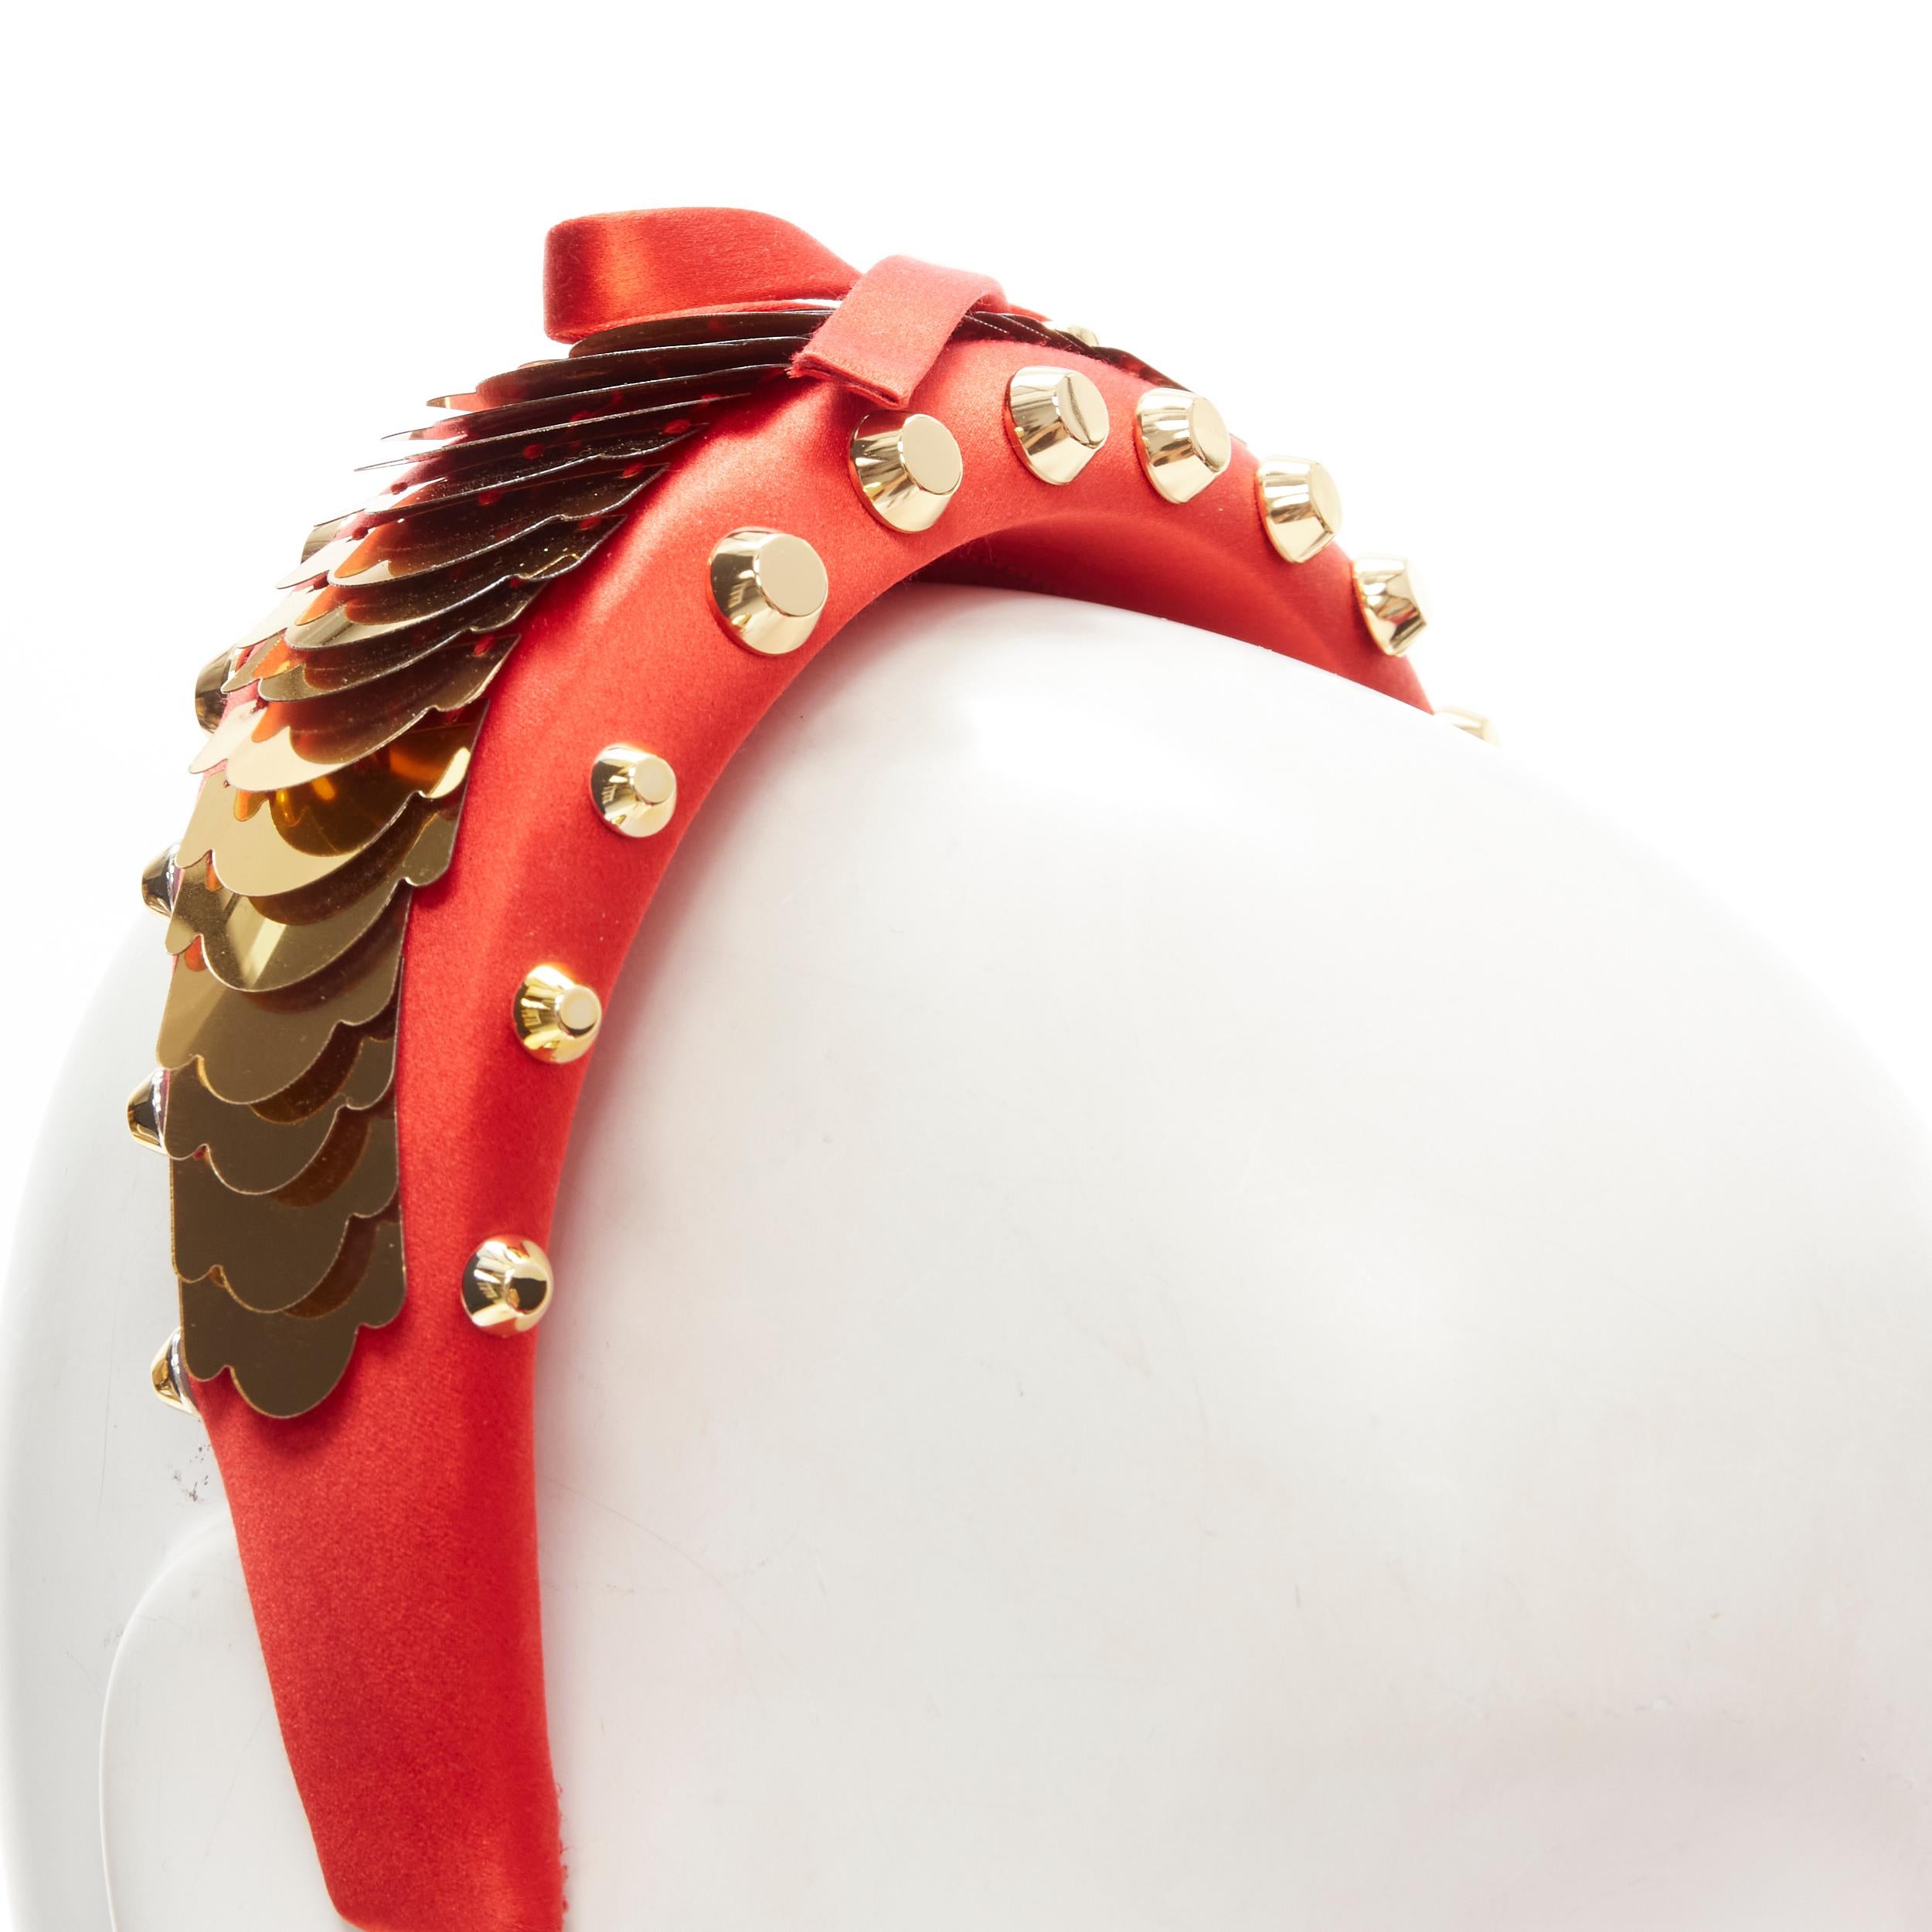 Women's PRADA red satin gold pailette studded bow puffy headband For Sale